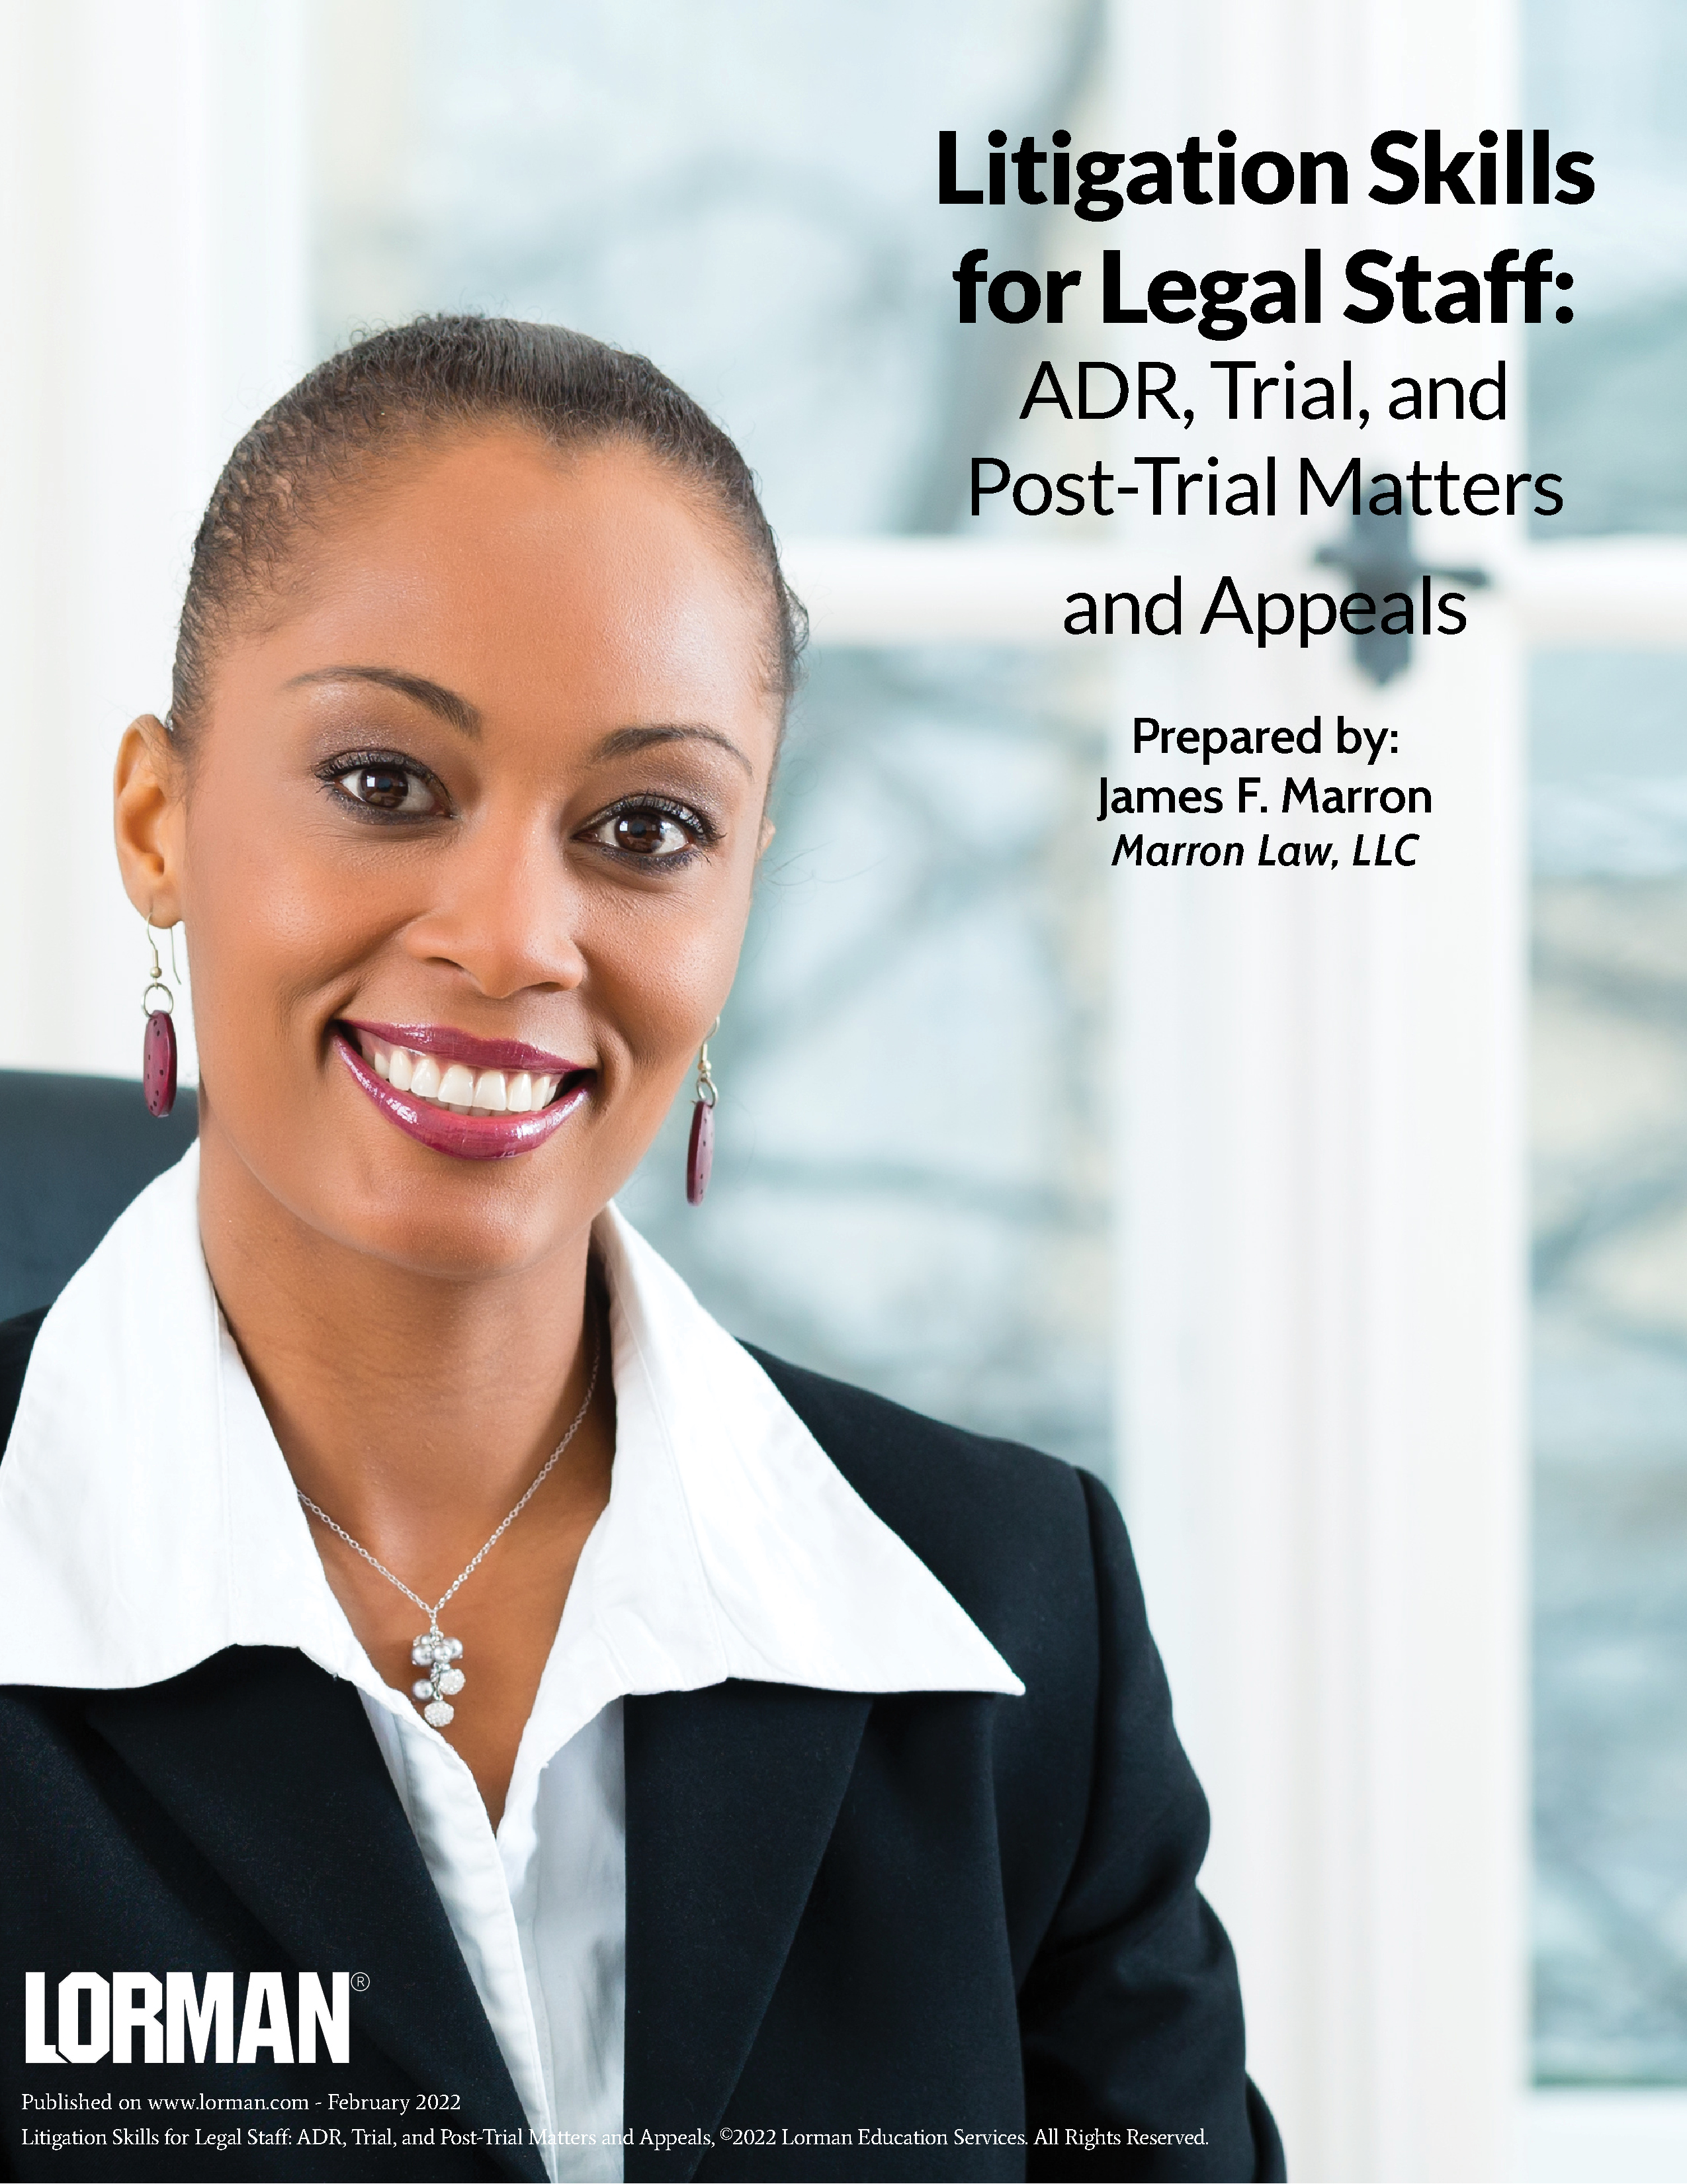 Litigation Skills for Legal Staff: ADR, Trial, and Post-Trial Matters and Appeals